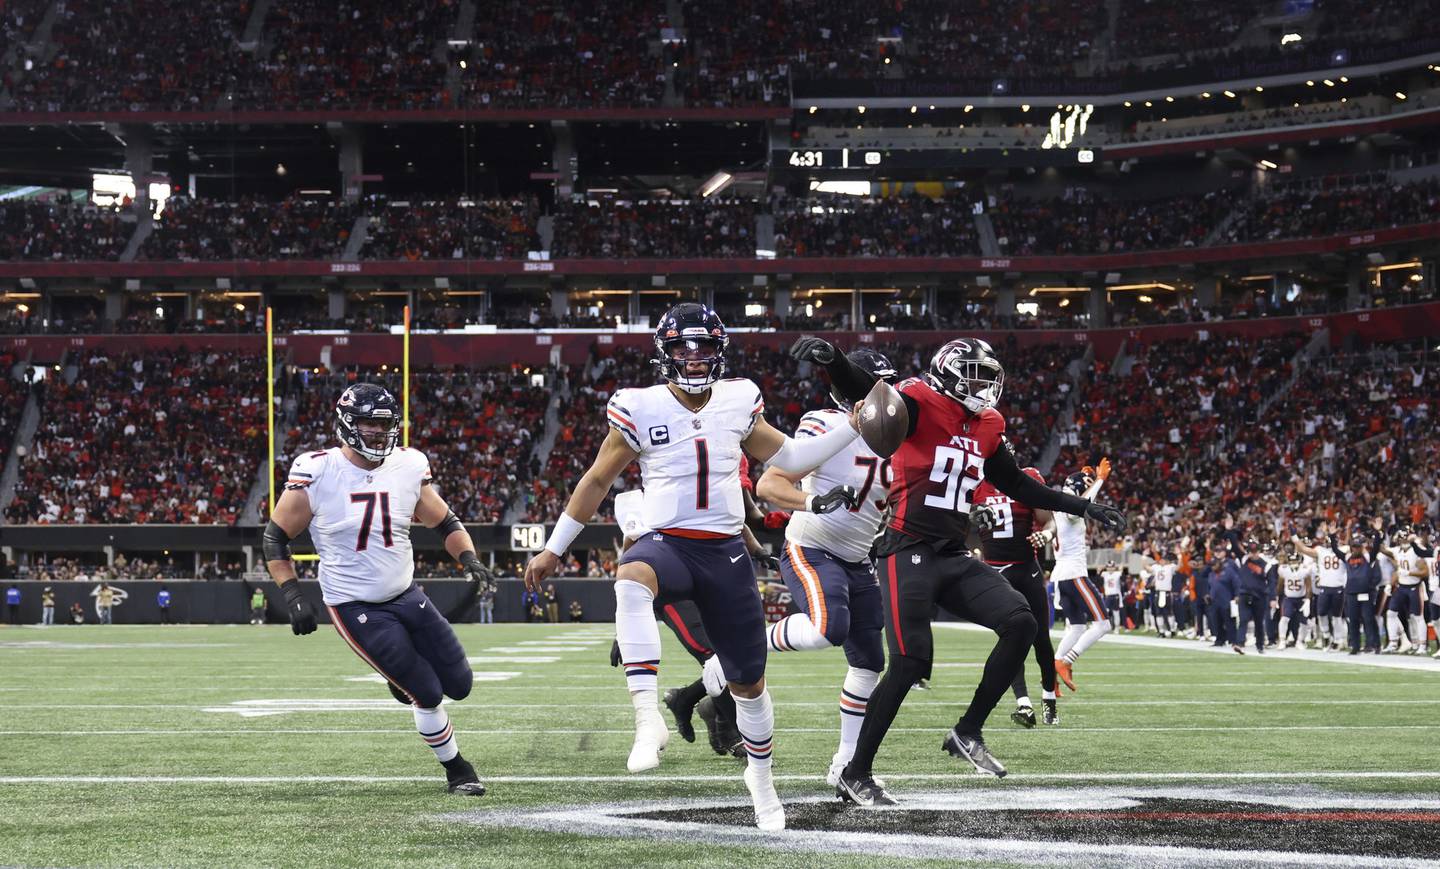 Bears quarterback Justin Fields keeps the ball for a rushing touchdown in the second quarter against the Falcons at Mercedes-Benz Stadium on Nov. 20, 2022.